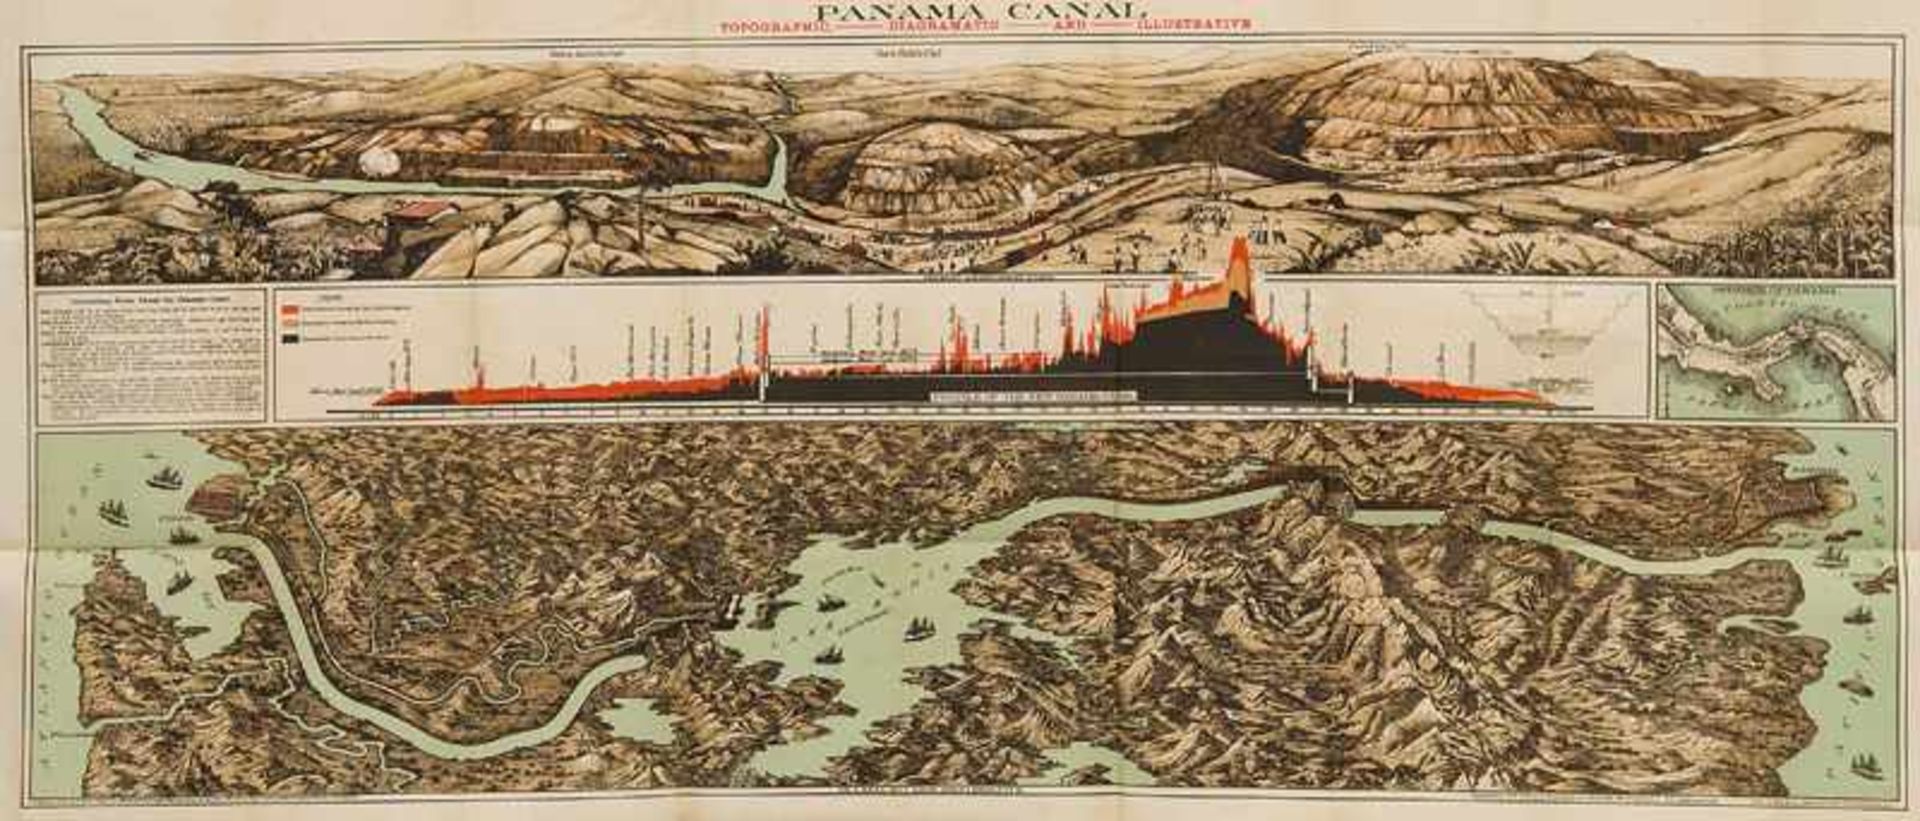 America Beverstock, EJ. Panama Canal, Topographic, Diagramatic, and Illustrative. Colour